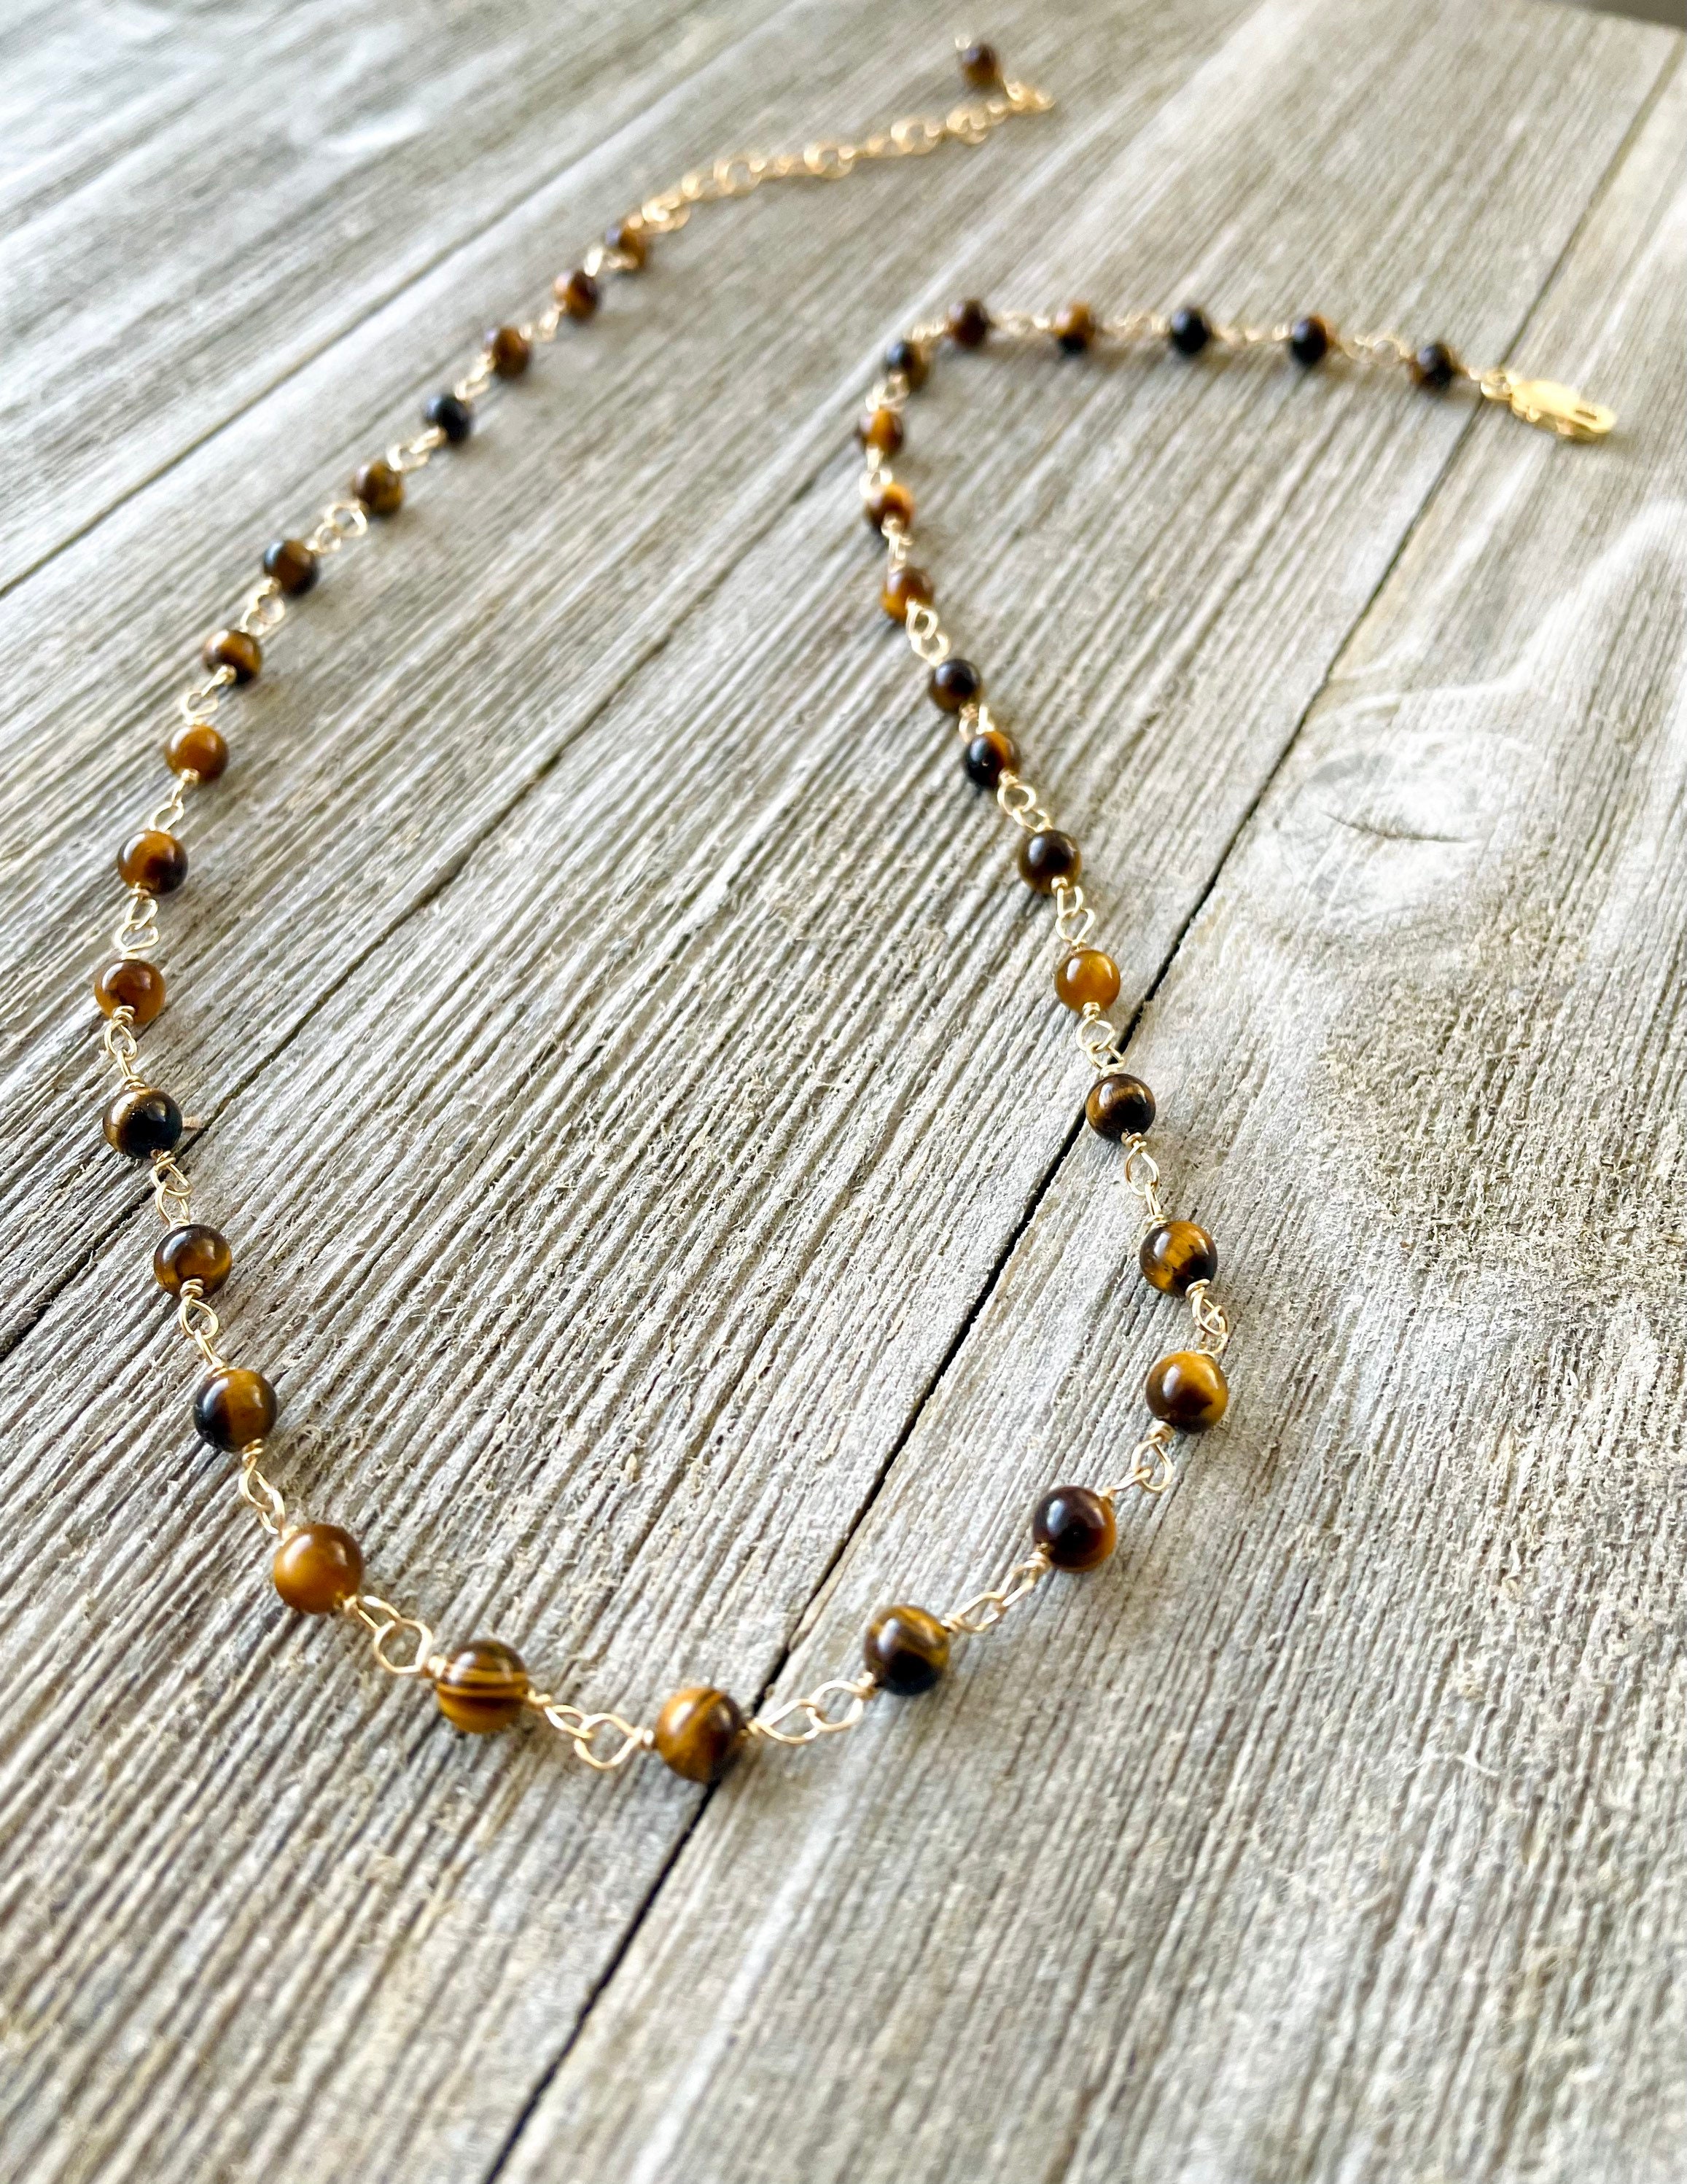 1-Stone Petite Rock Necklace - Judith Bright Designer Jewelry Tiger's Eye / 14K Gold-Filled